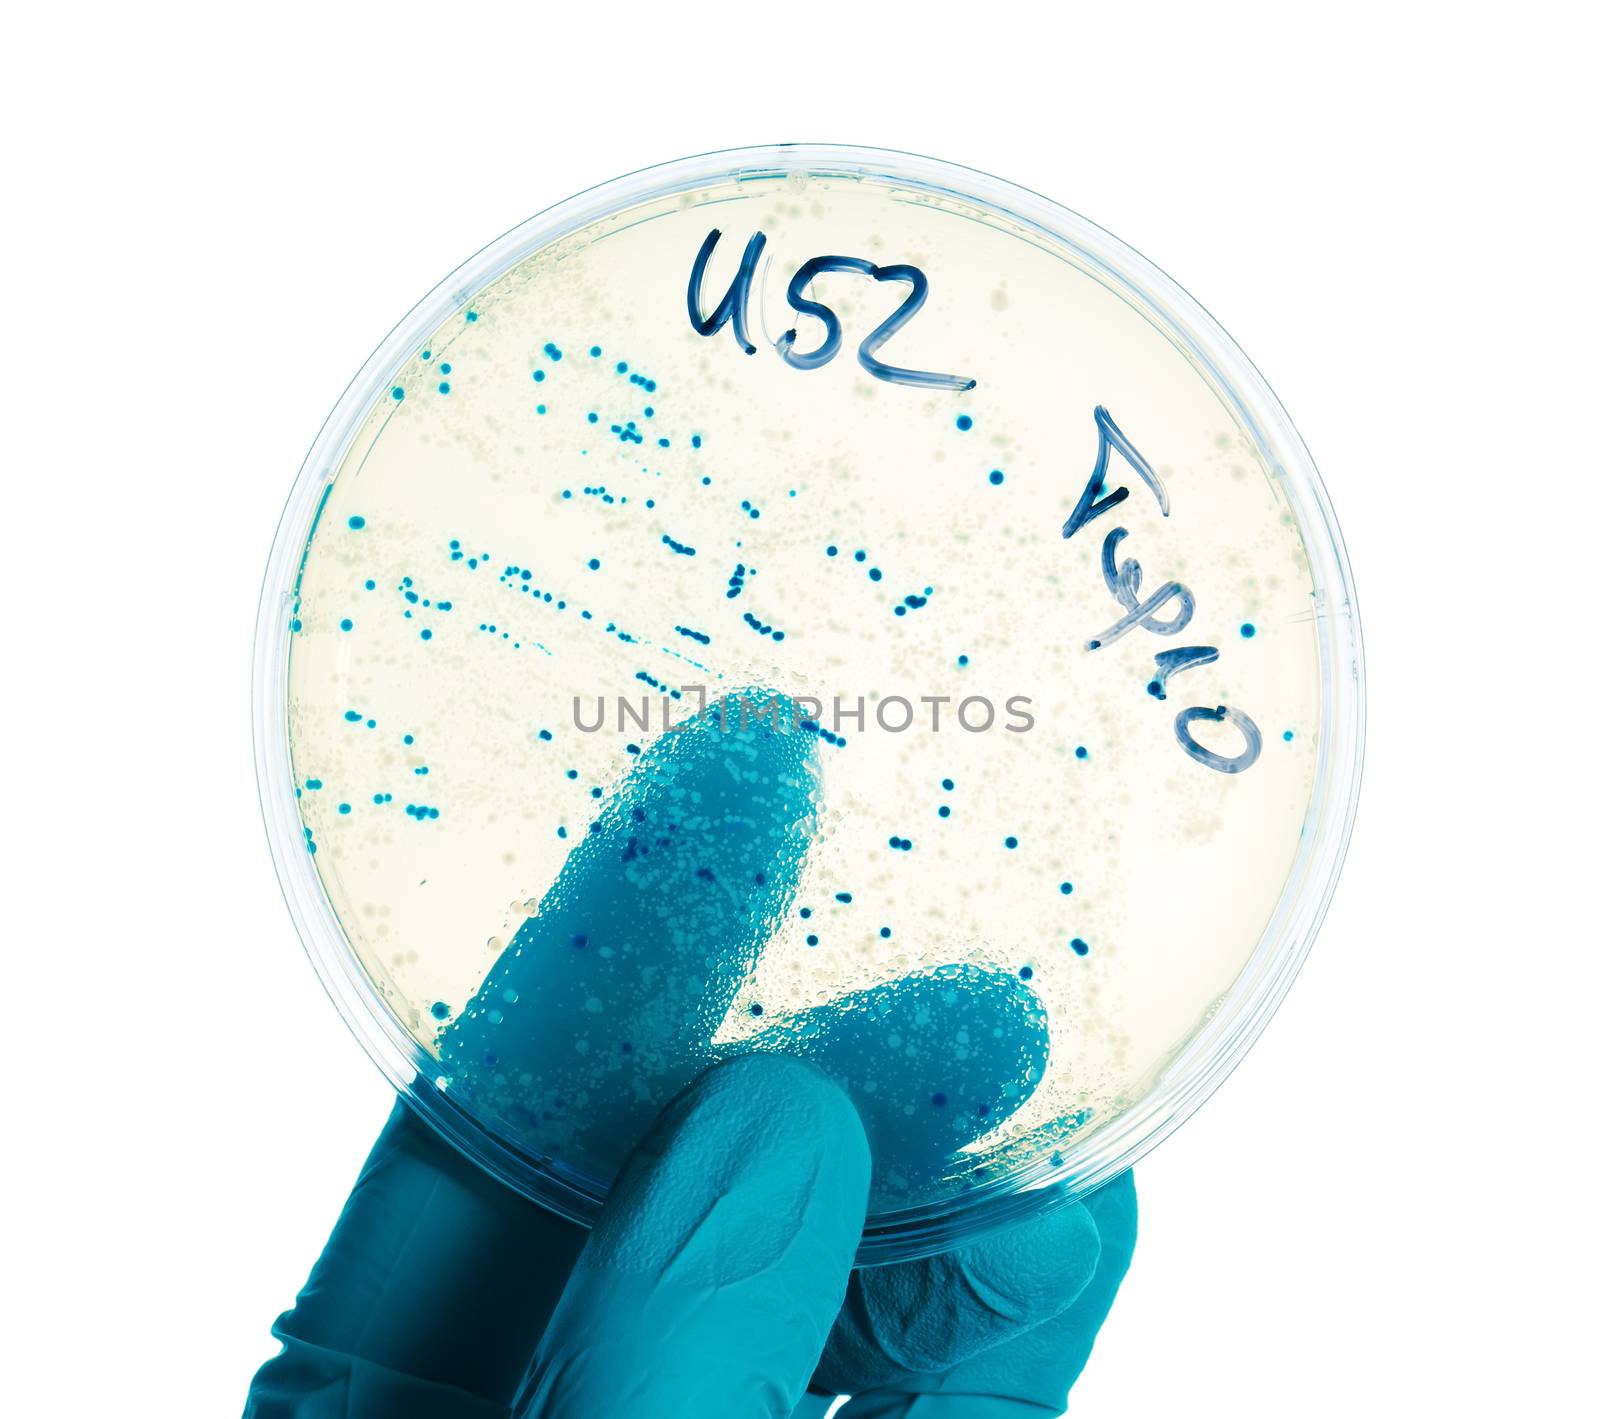 Hand in nitril glove holds Petri dish with bacterial colonies by motorolka